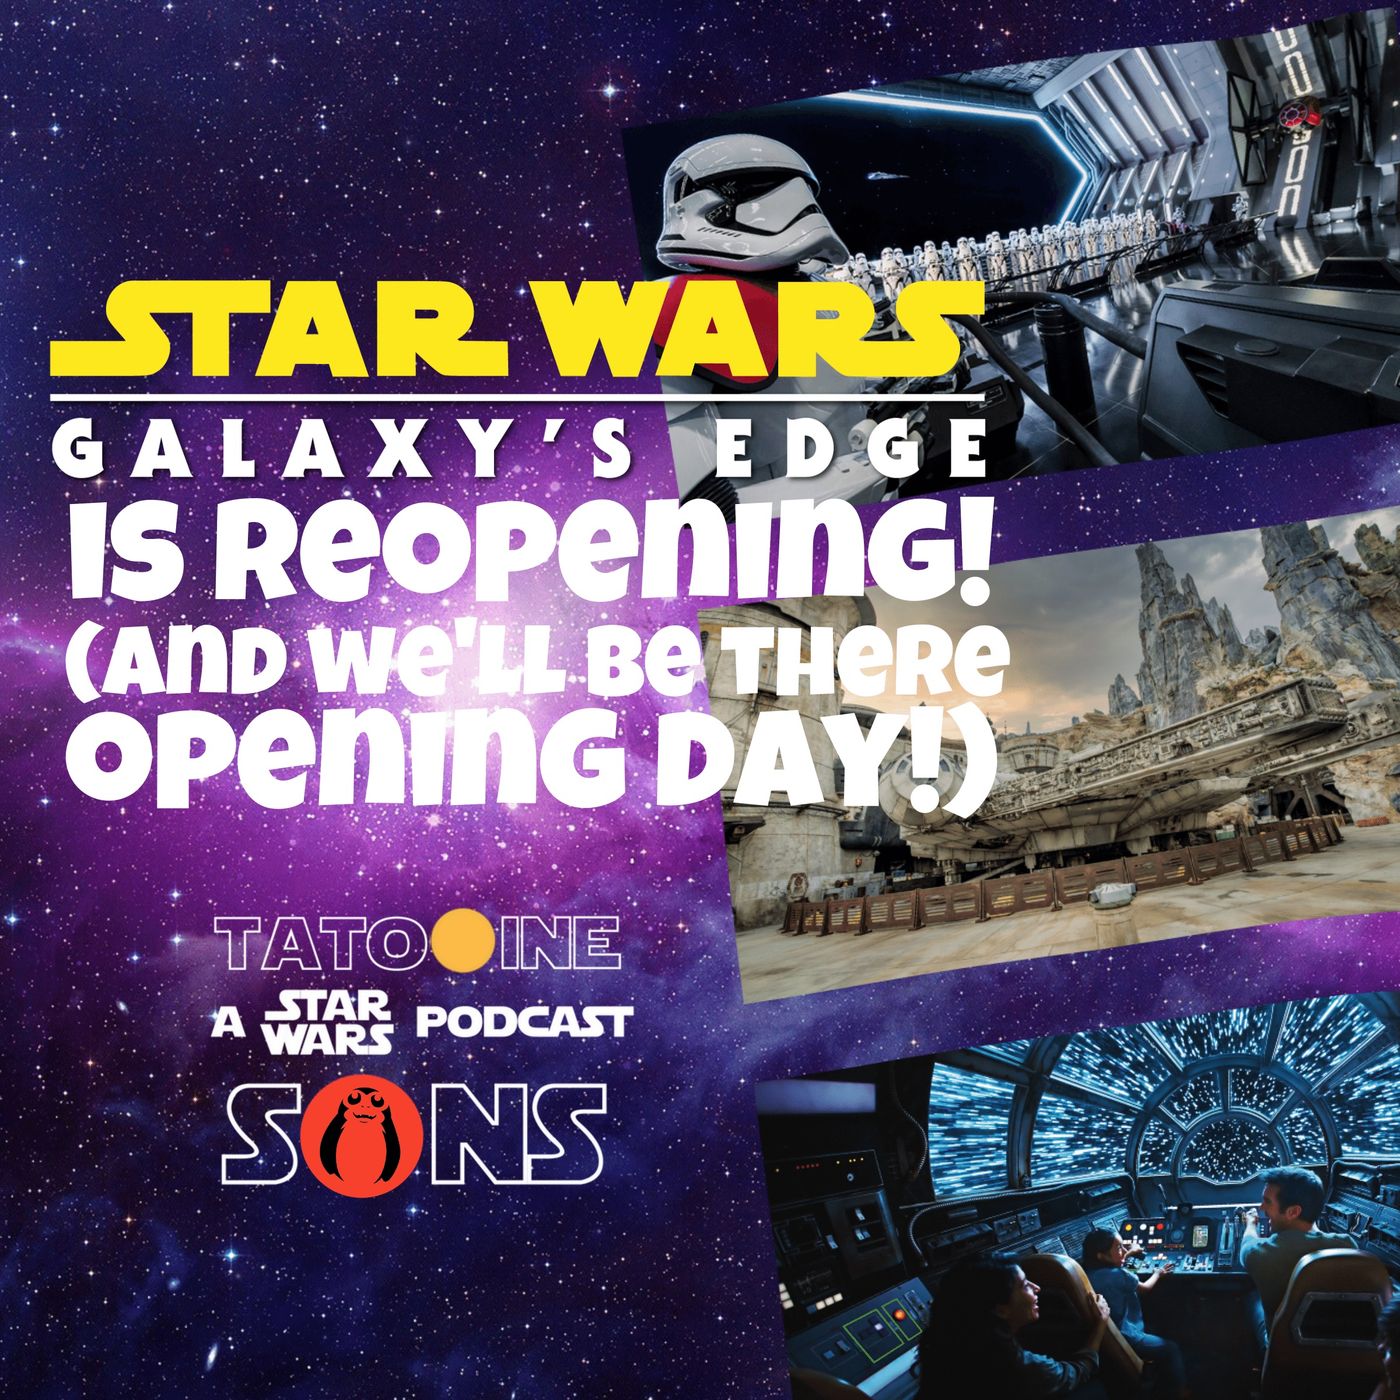 Galaxy’s Edge is REOPENING! 😮 (and WE’LL  Be There Opening Day! 😃)